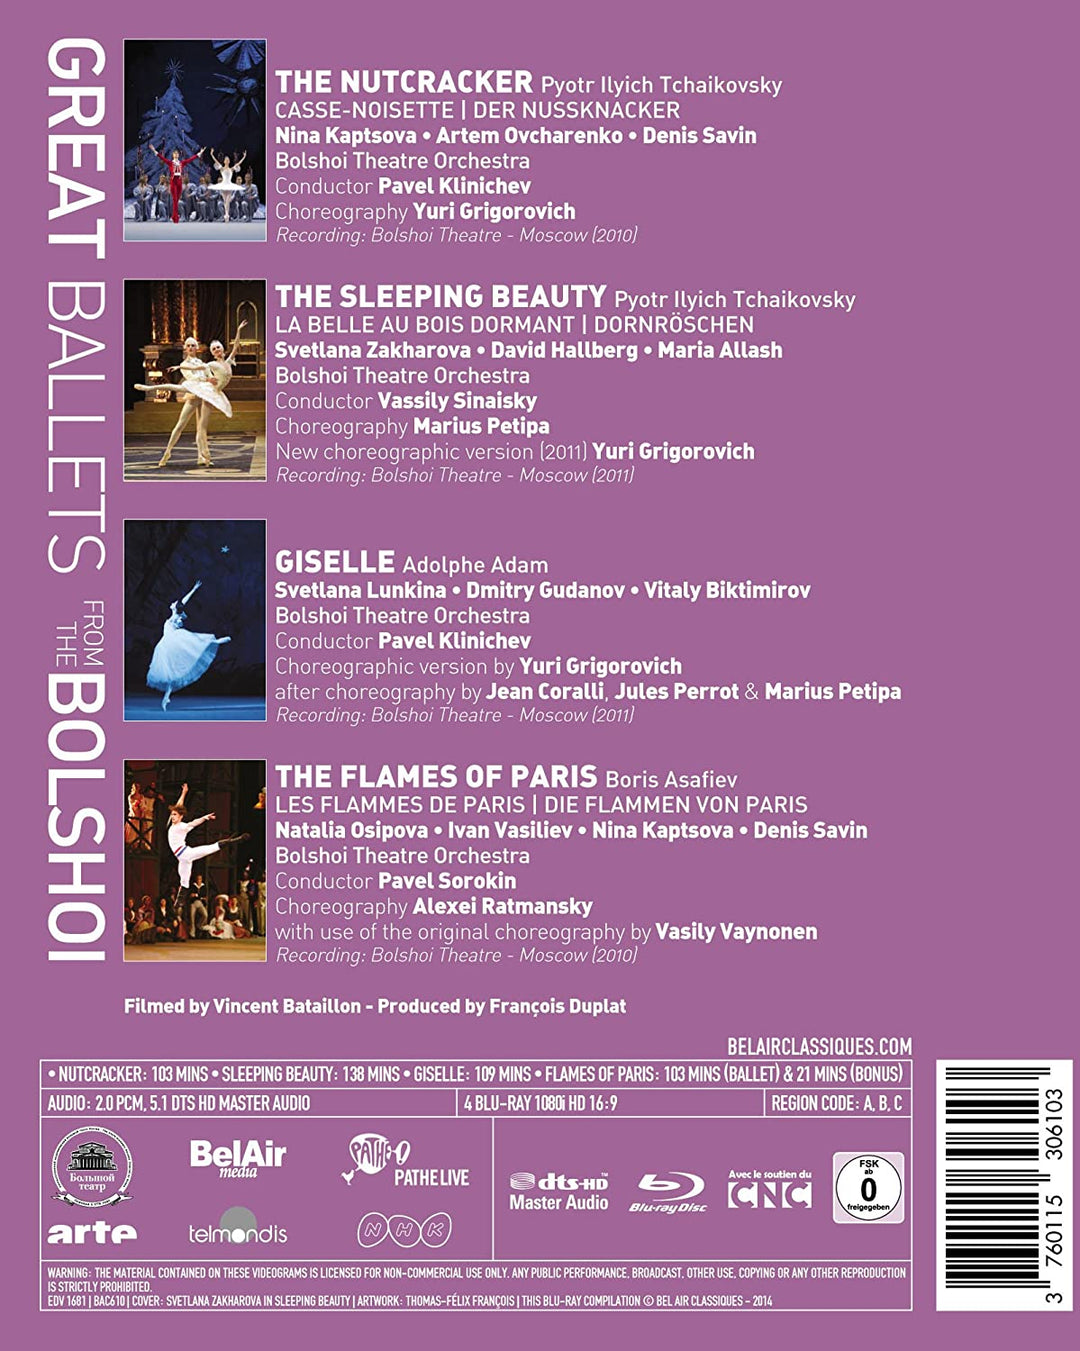 Great Ballets From The Bolshoi (The Nutcracker, The Sleeping Beauty, Giselle, The Flames of Paris) [ Blu-ray]